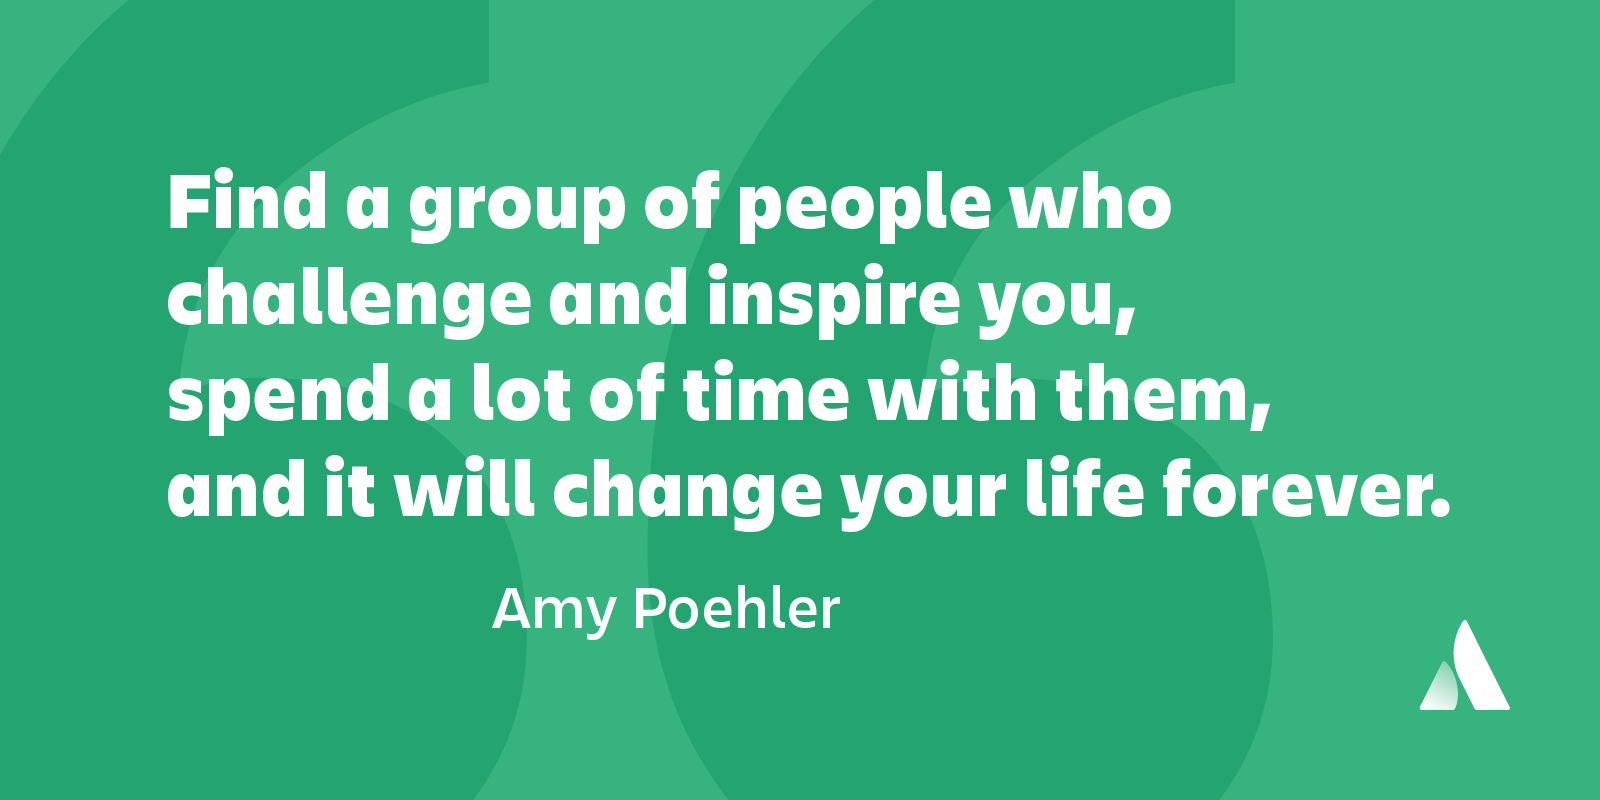 find a group of people who challenge and inspire you, spend a lot of time with them, and it will change your life forever. amy poehler